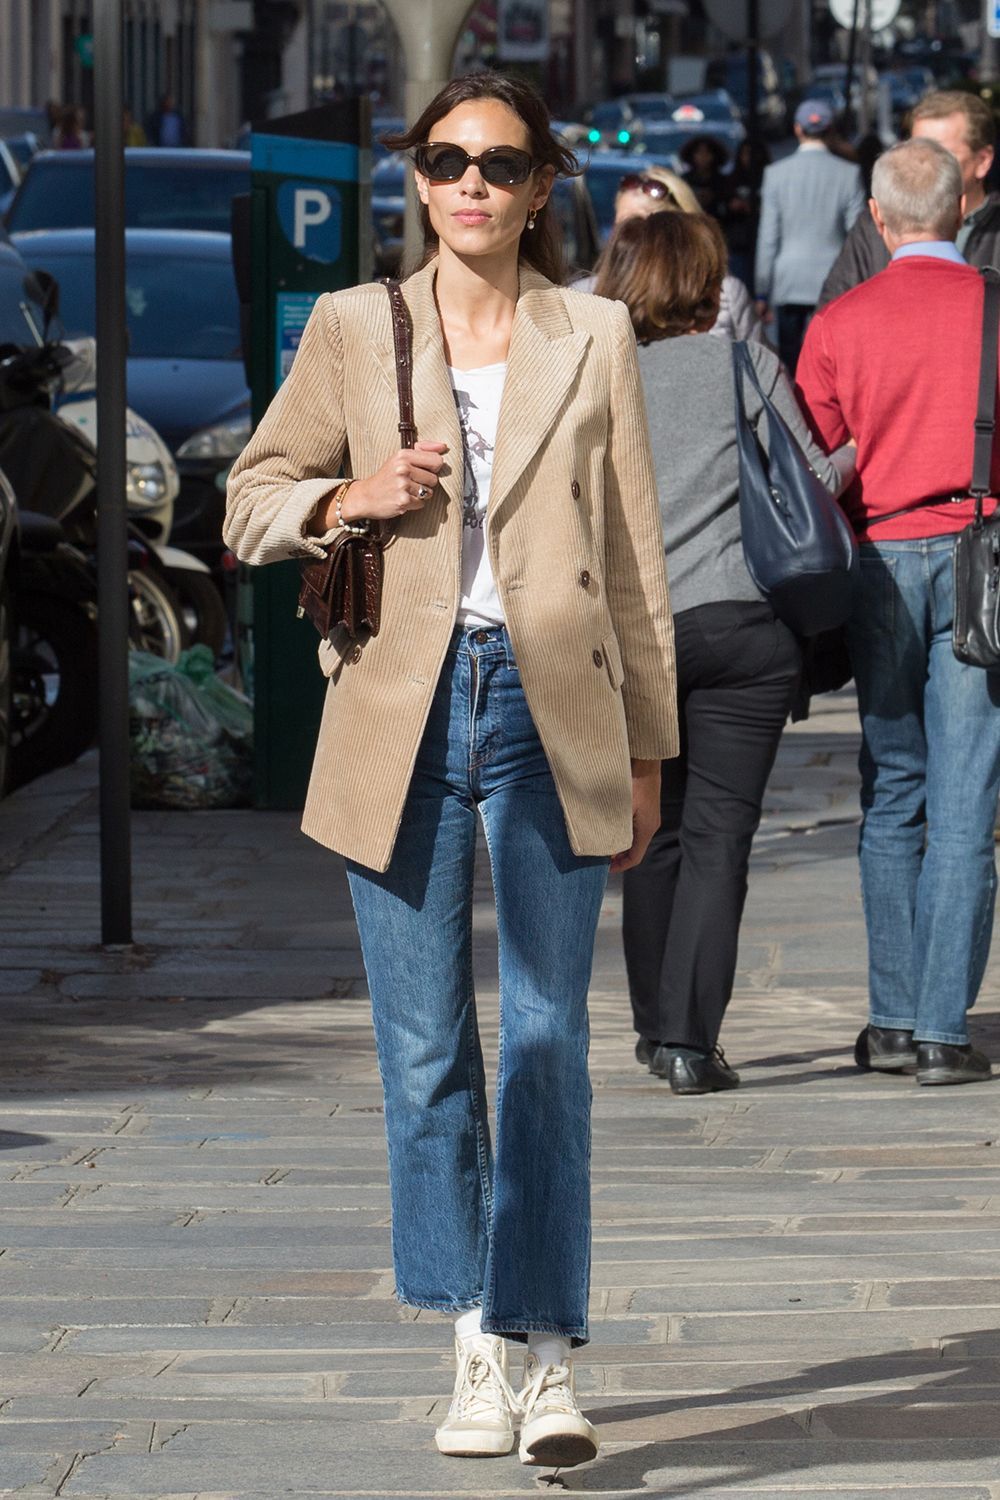 How to Pull Off an Everday Blazer and Jeans Outfit Like Alexa Chung